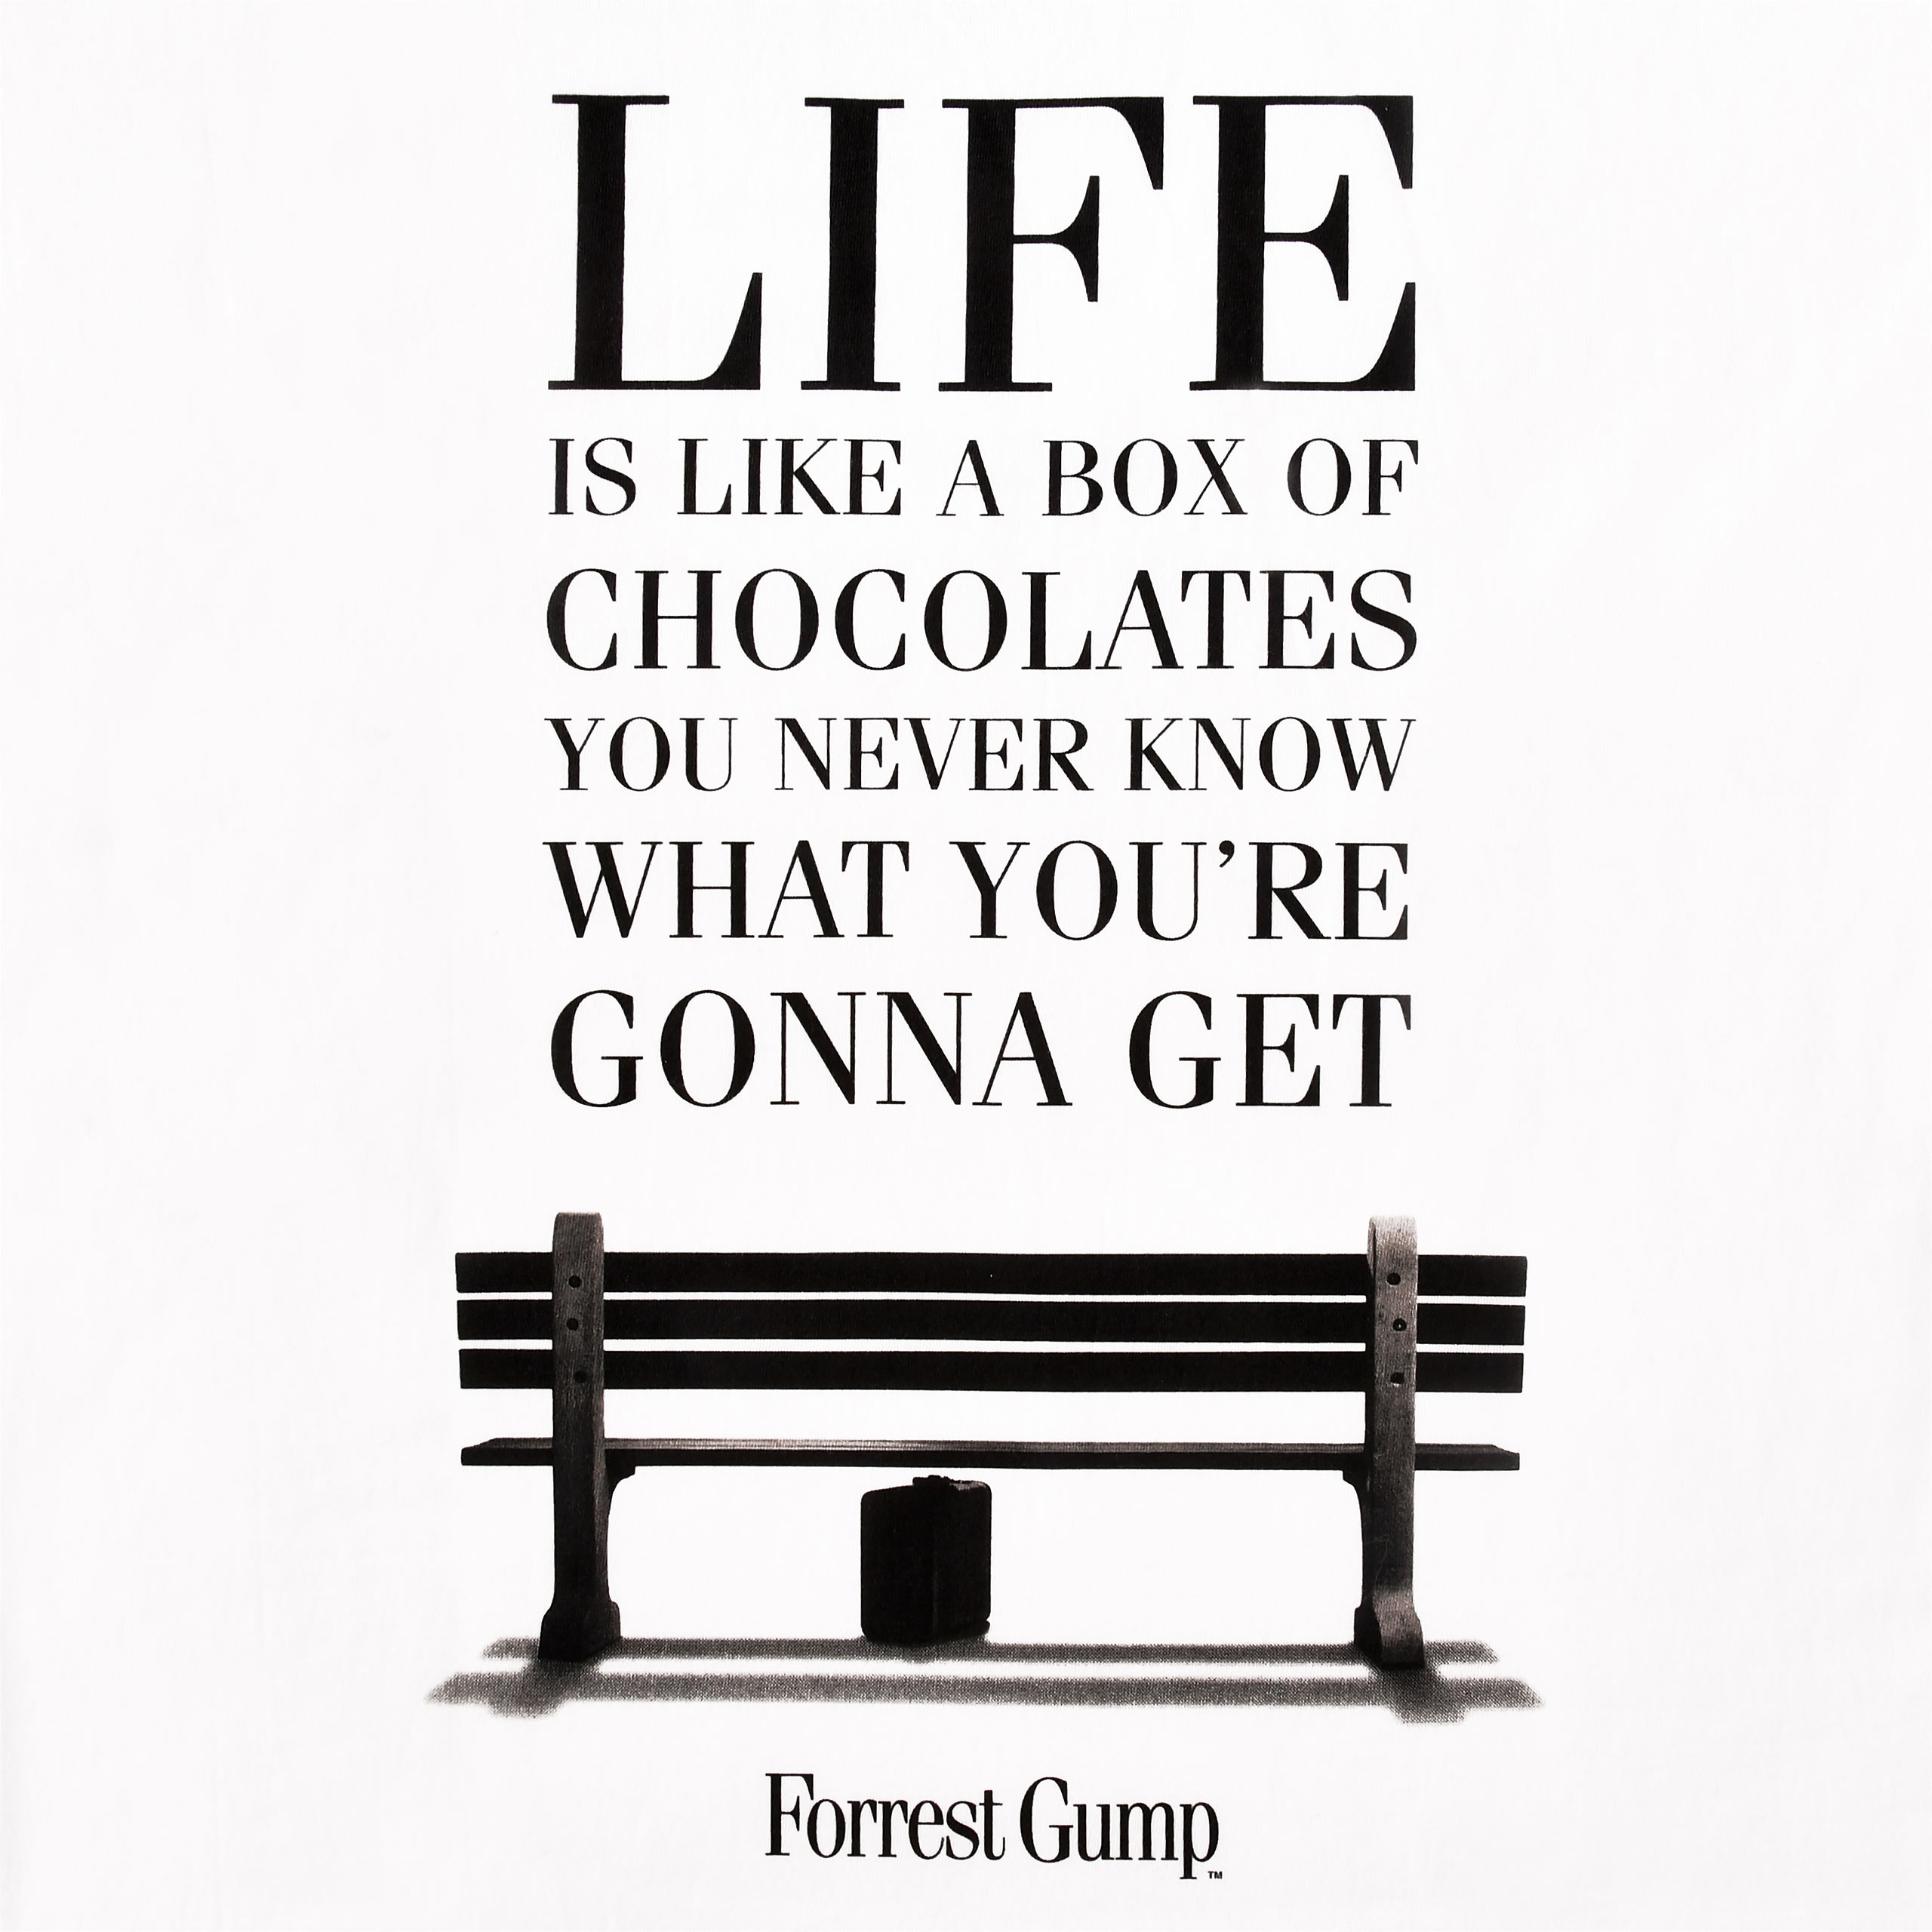 Forrest Gump - Life Is Like a Box of Chocolates T-Shirt wit